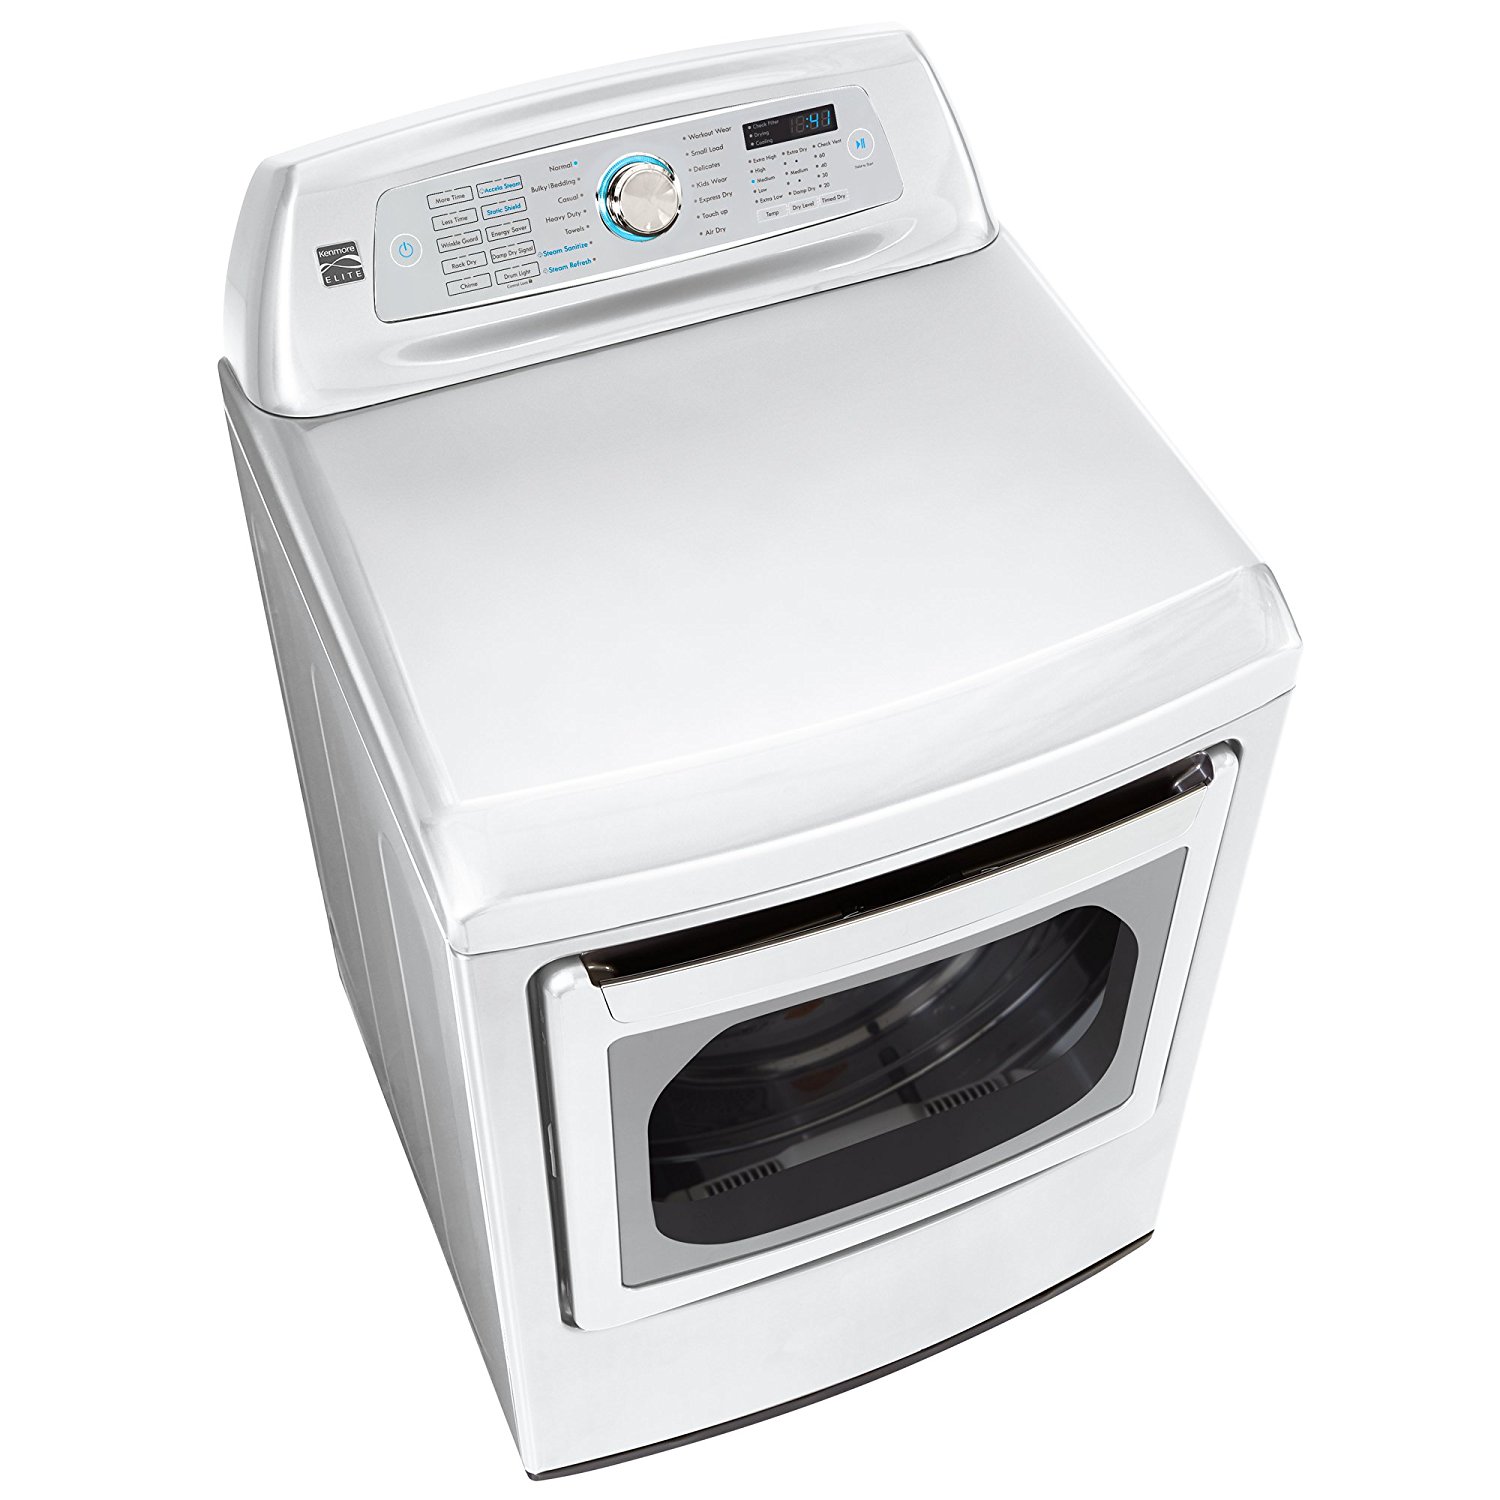 kenmore's more affordable option